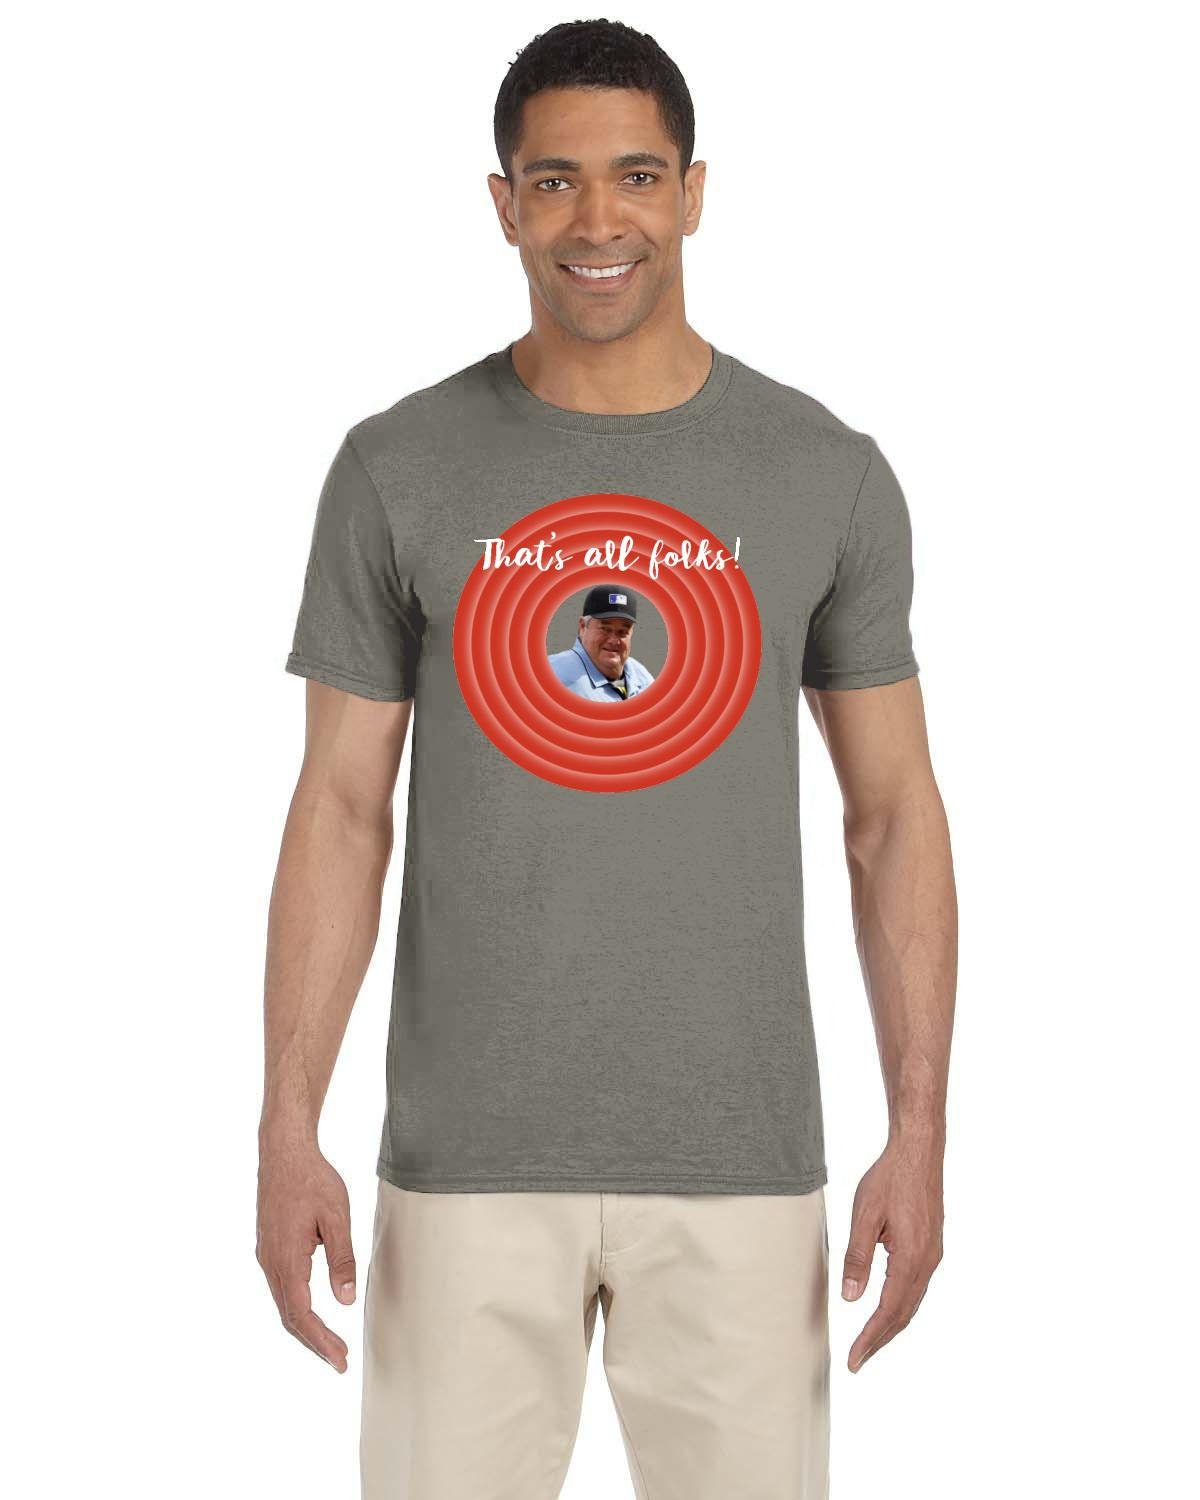 Discover Umpire Joe West "That's All Folks" Unisex Adult Softstyle T-Shirt